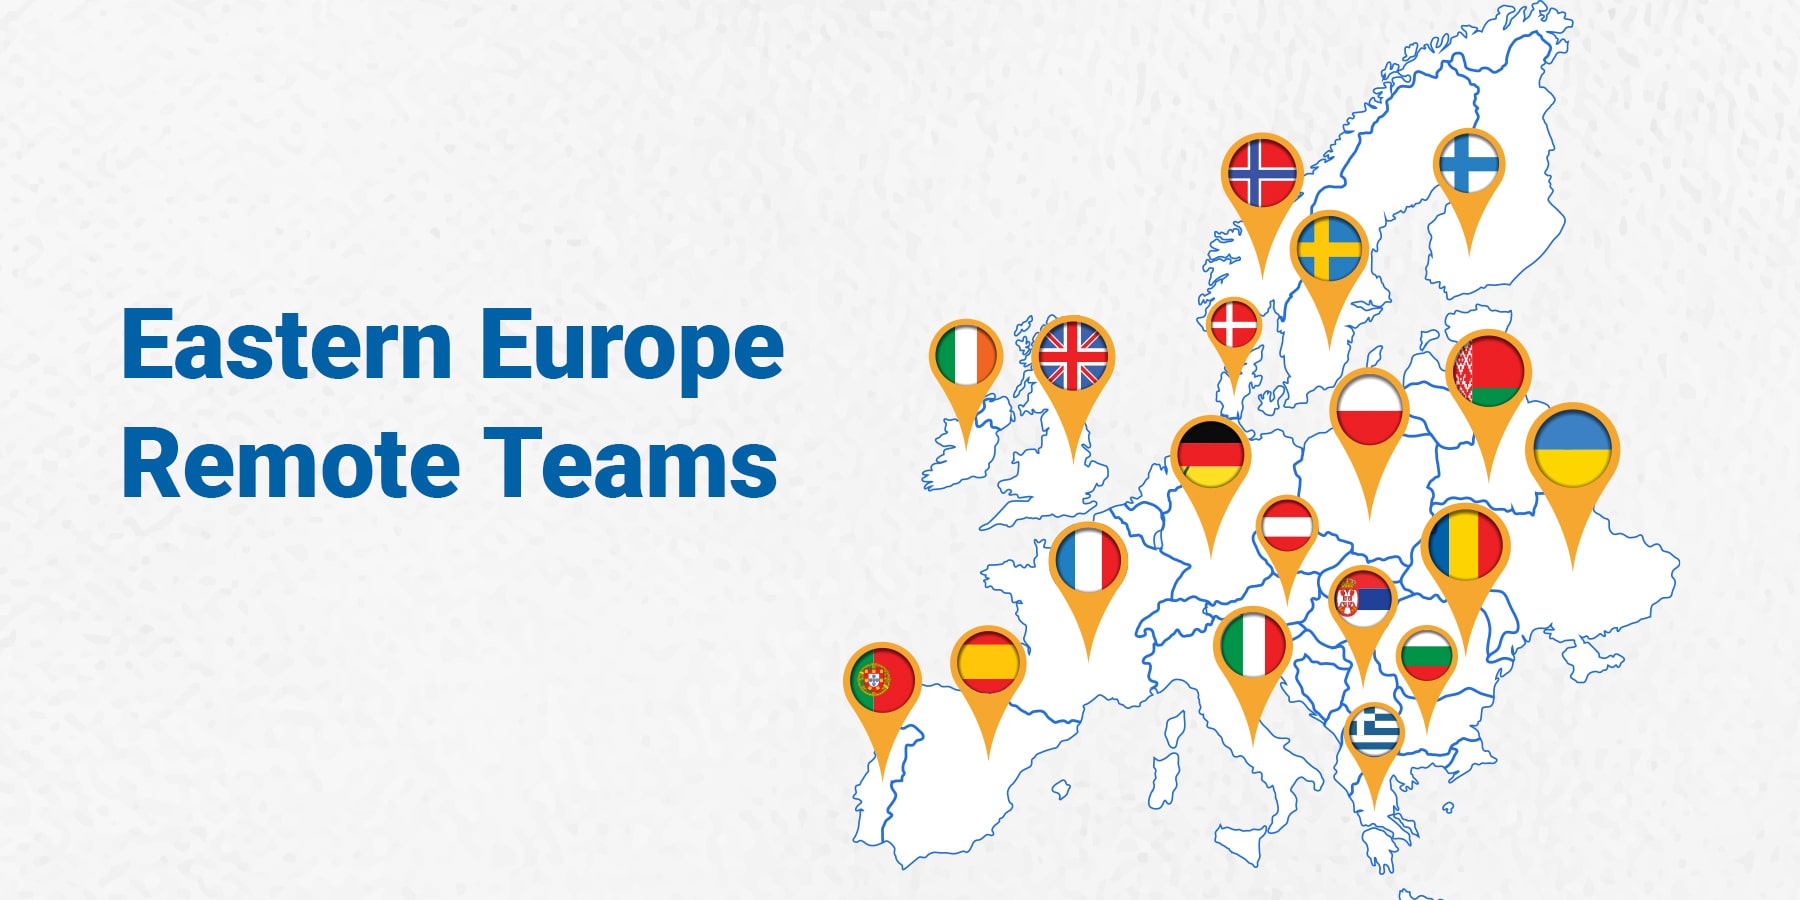 Your eCommerce Needs a Remote Team from Eastern Europe